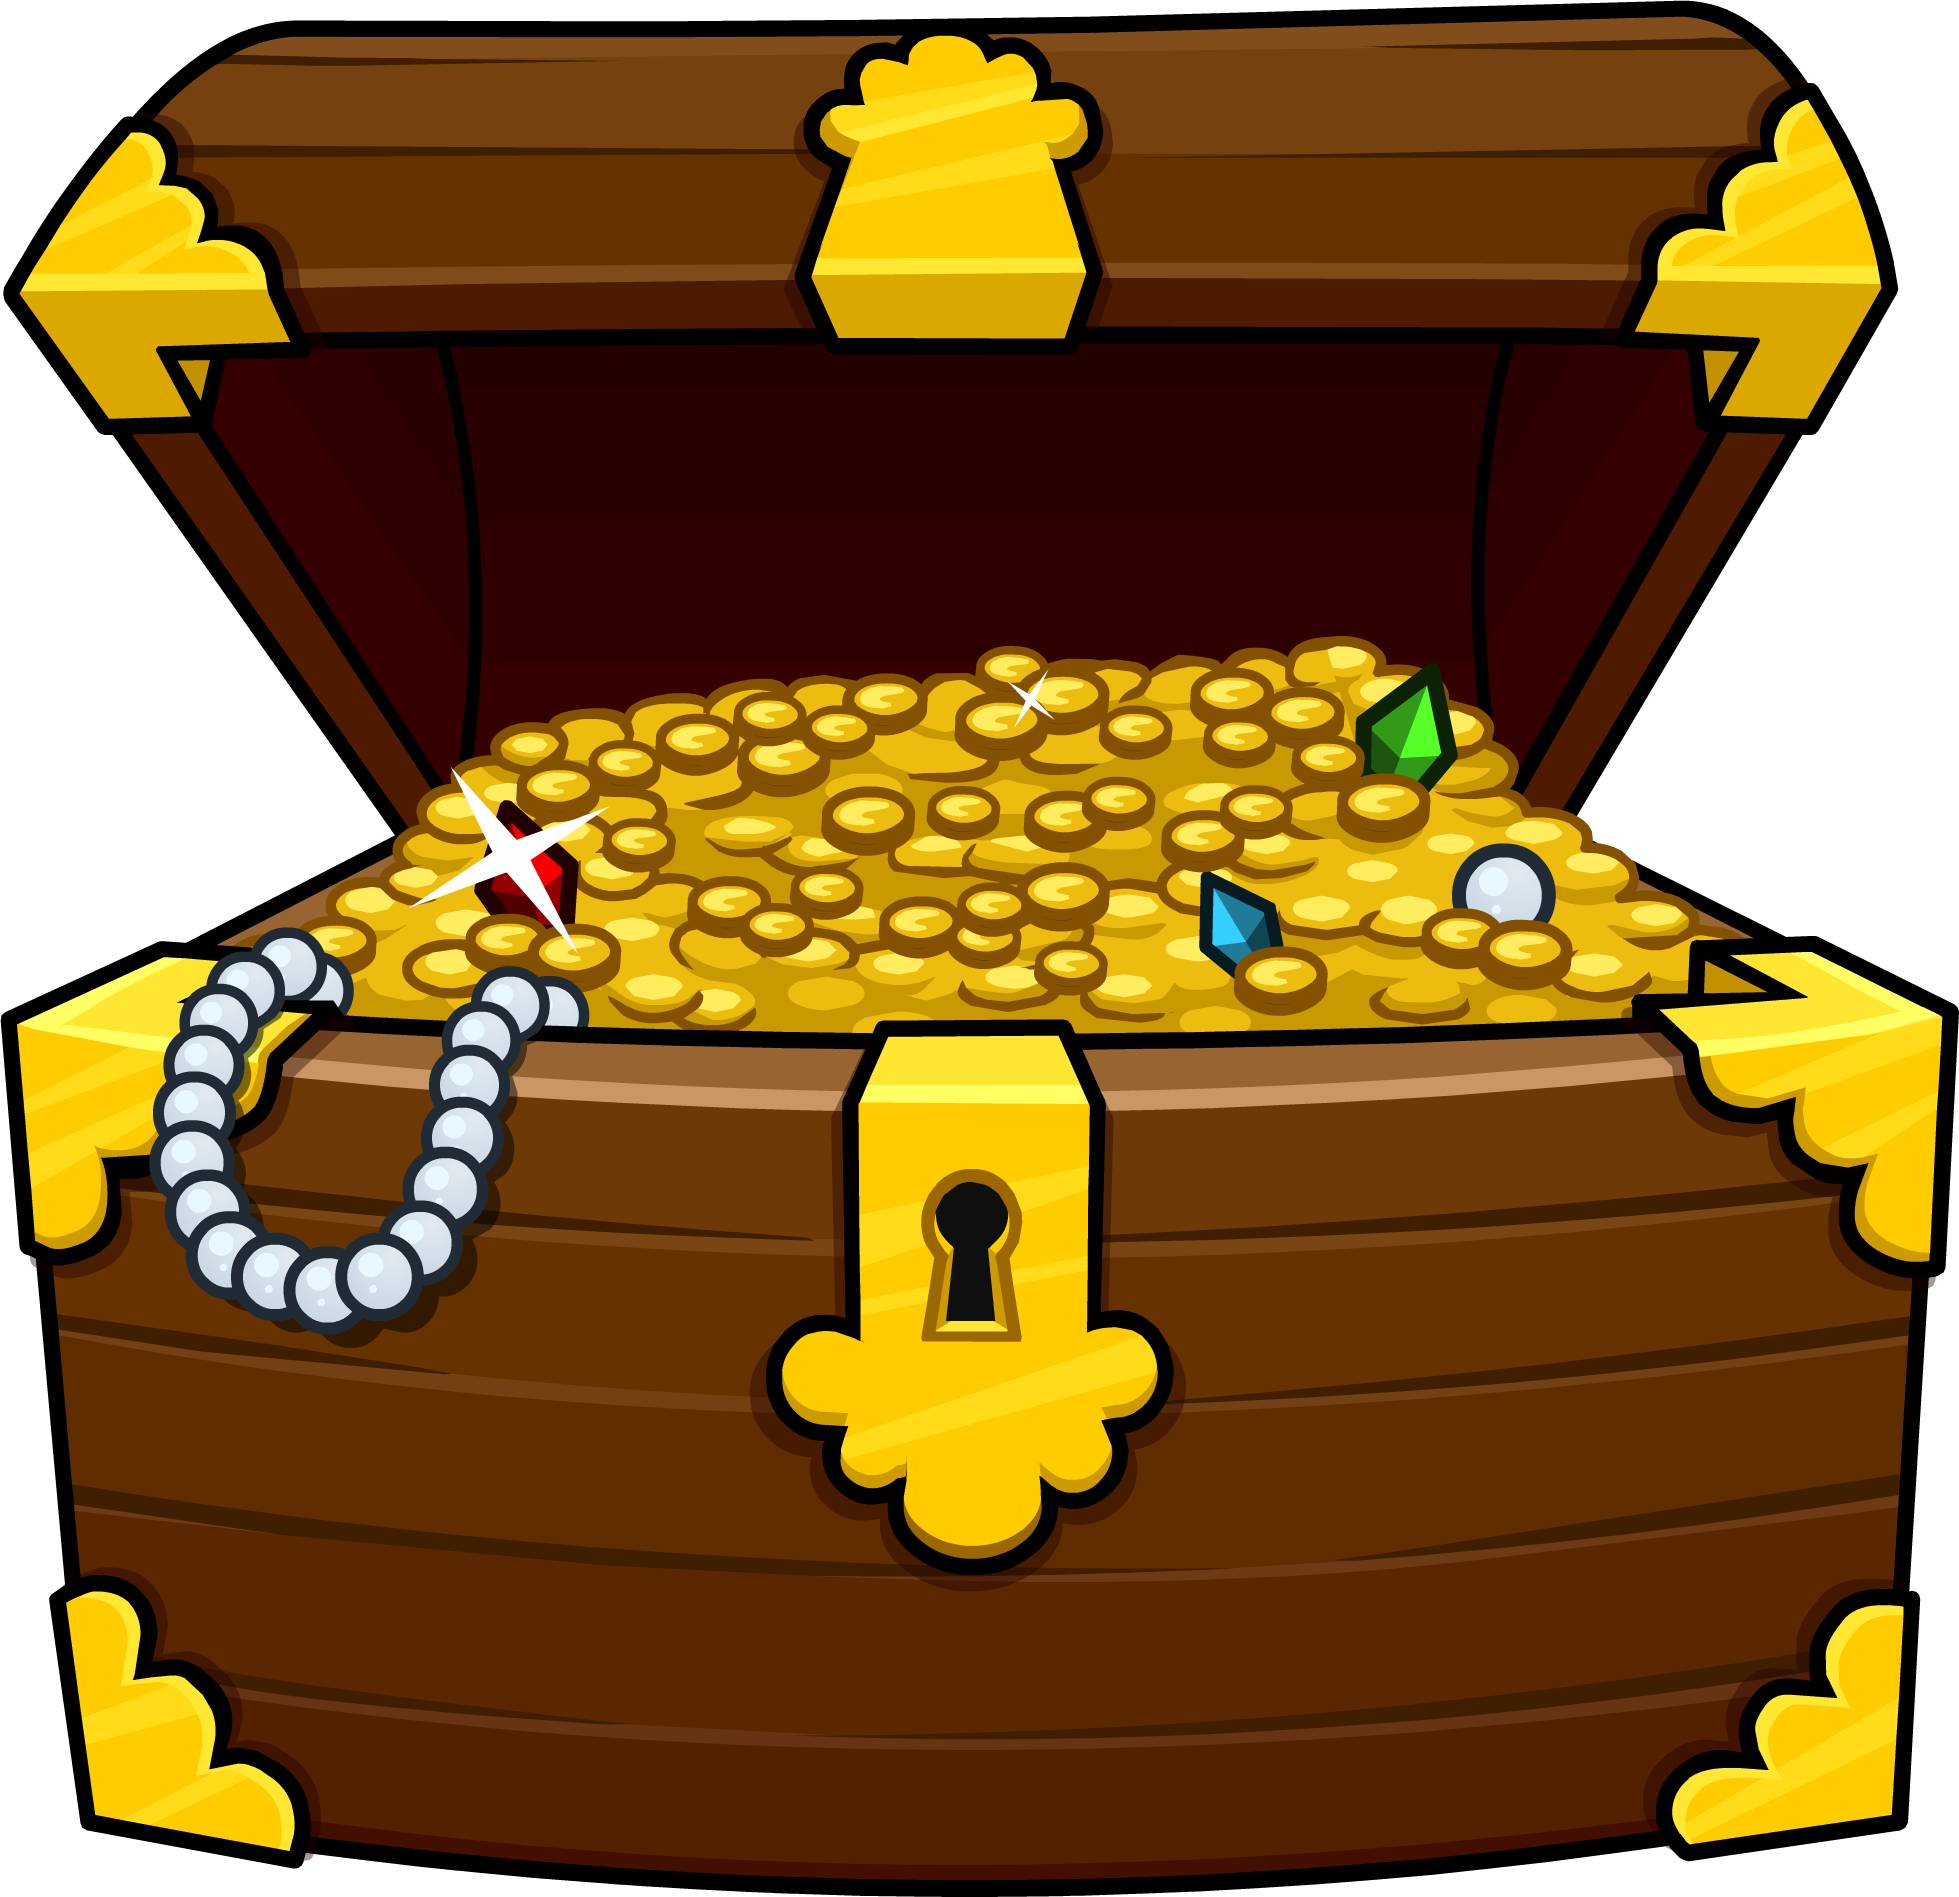 A Cartoon Treasure Chest With Gold Coins And Diamonds